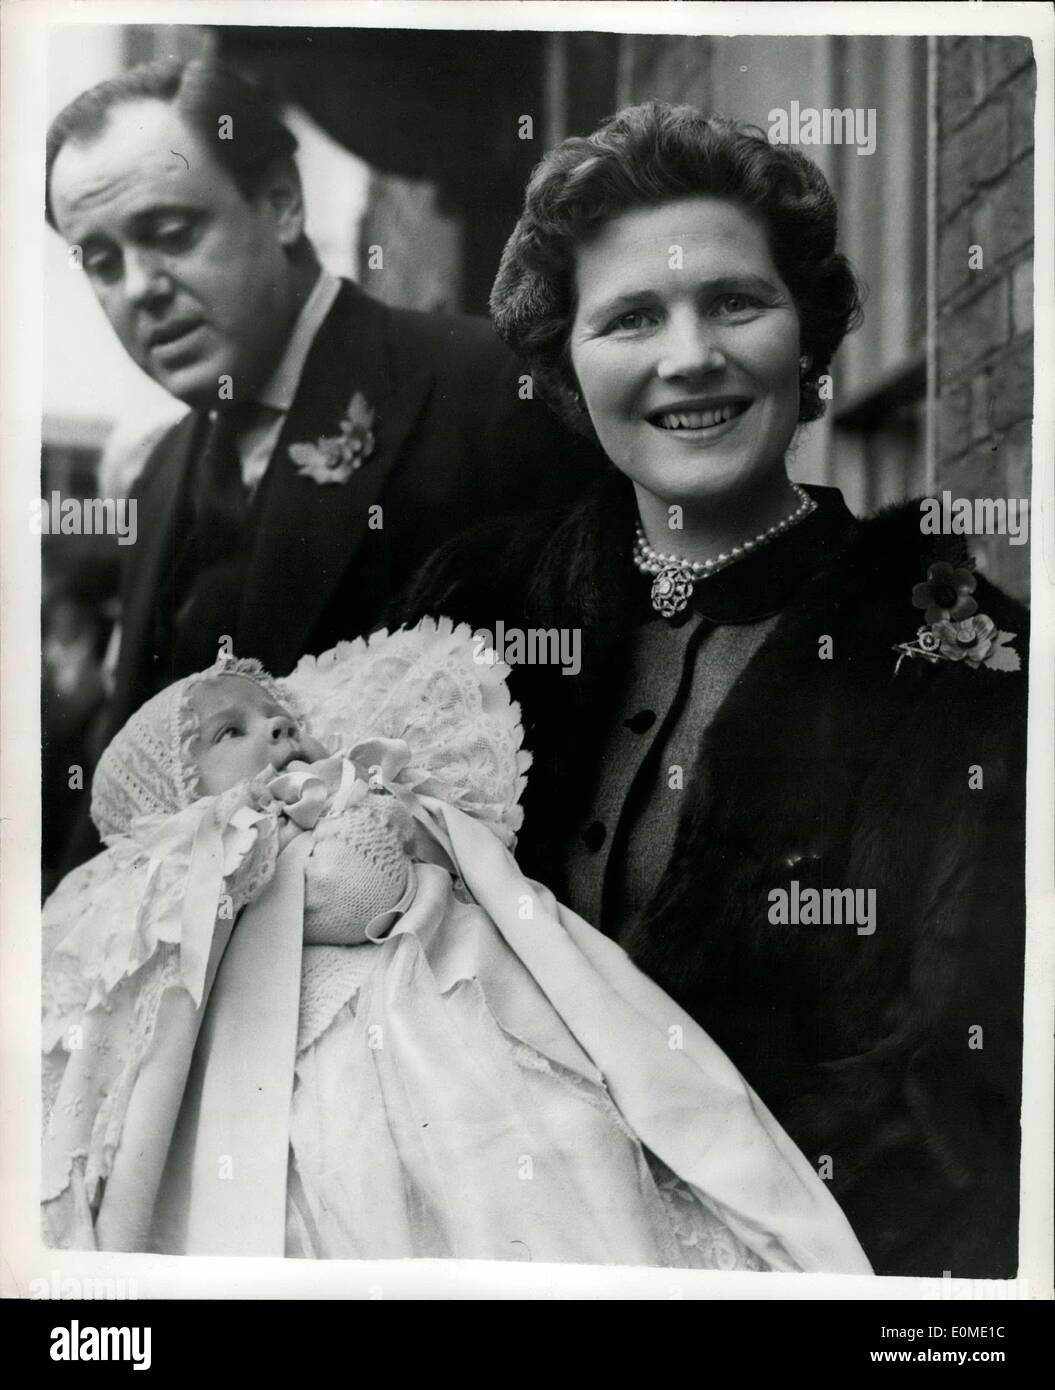 Nov. 06, 1954 - Sir Winston Churchill Attends Christening of his Ninth Grandchild.: Sir Winston Churchill today attended the christening at Westerham Parish church, of his ninth grandchild - the baby daughter of Captain and Mrs. Christopher Soames (the former Mary Churchill). The baby was named Charlotte Clementine. Their three other children, Jeremy, Emma and Nicholas were present. Photo shows Captain and Mrs. Soames, with their baby daughter, Charlotte Clementine, after today's christening. Stock Photo